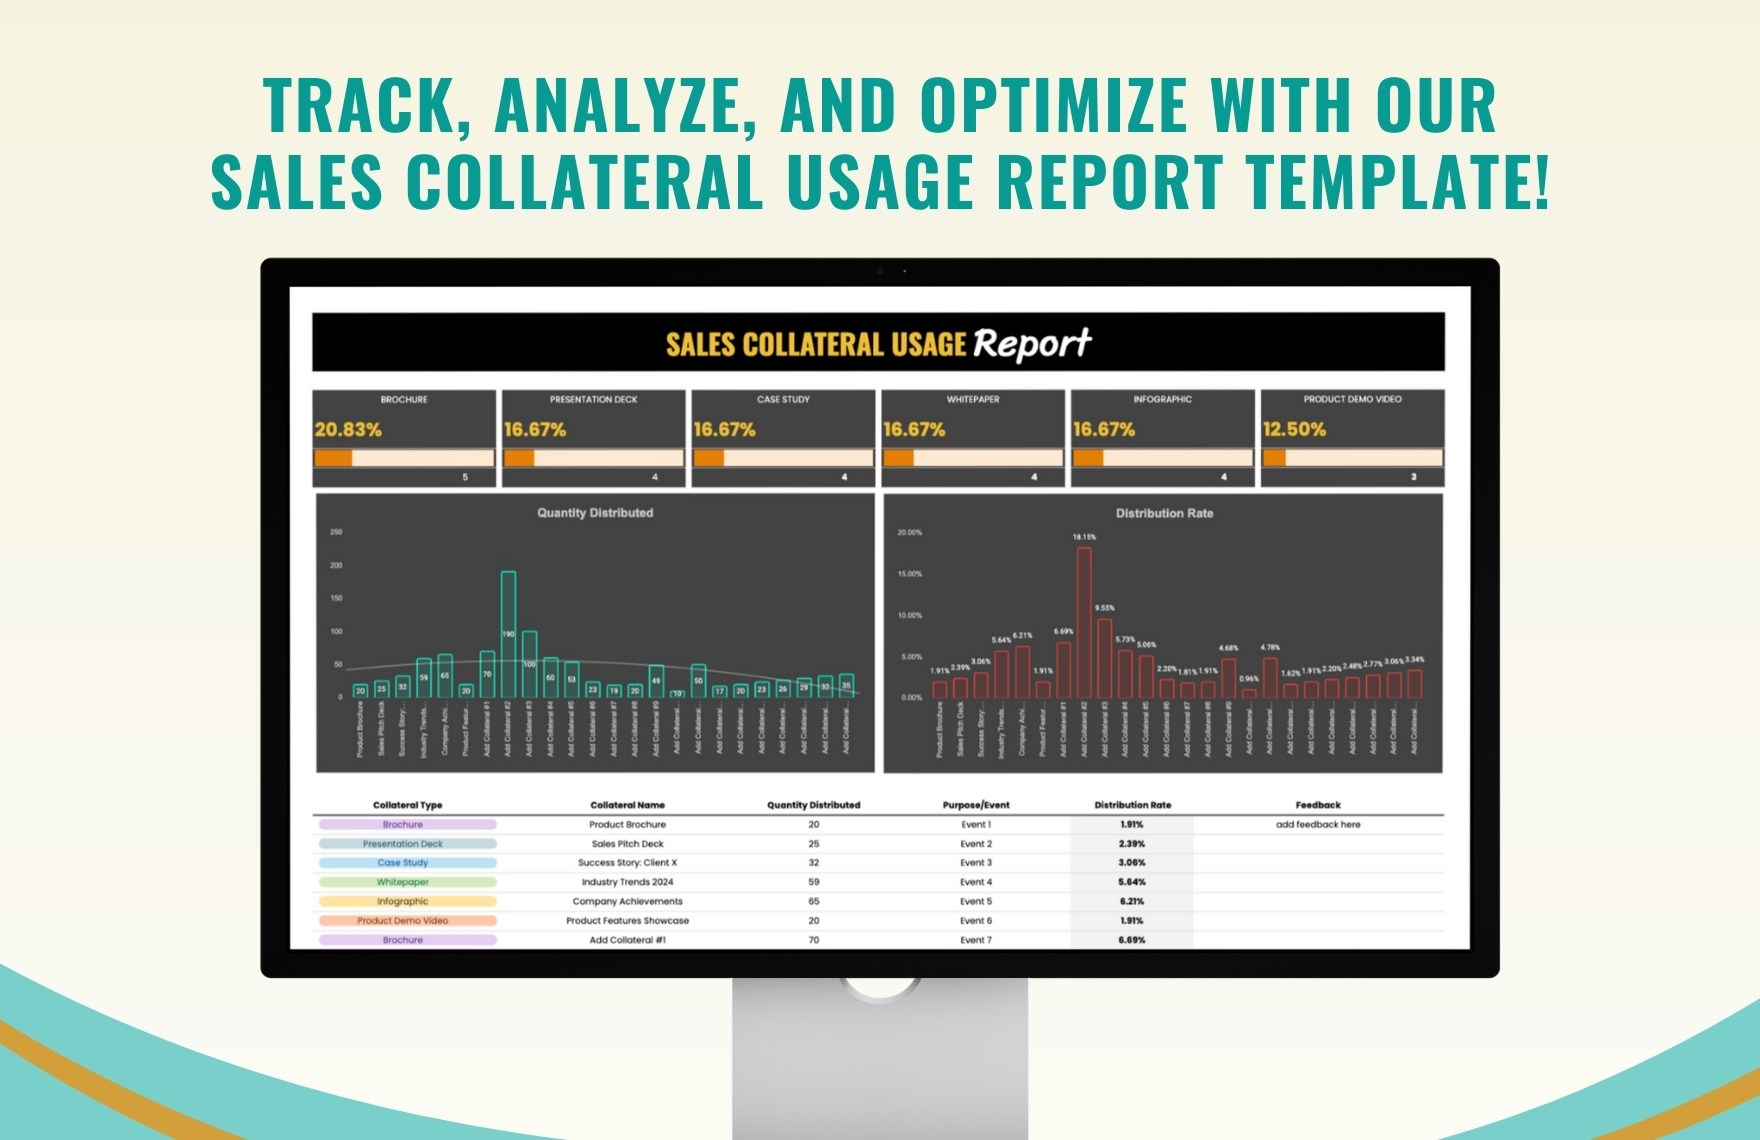 Sales Collateral Usage Report Template